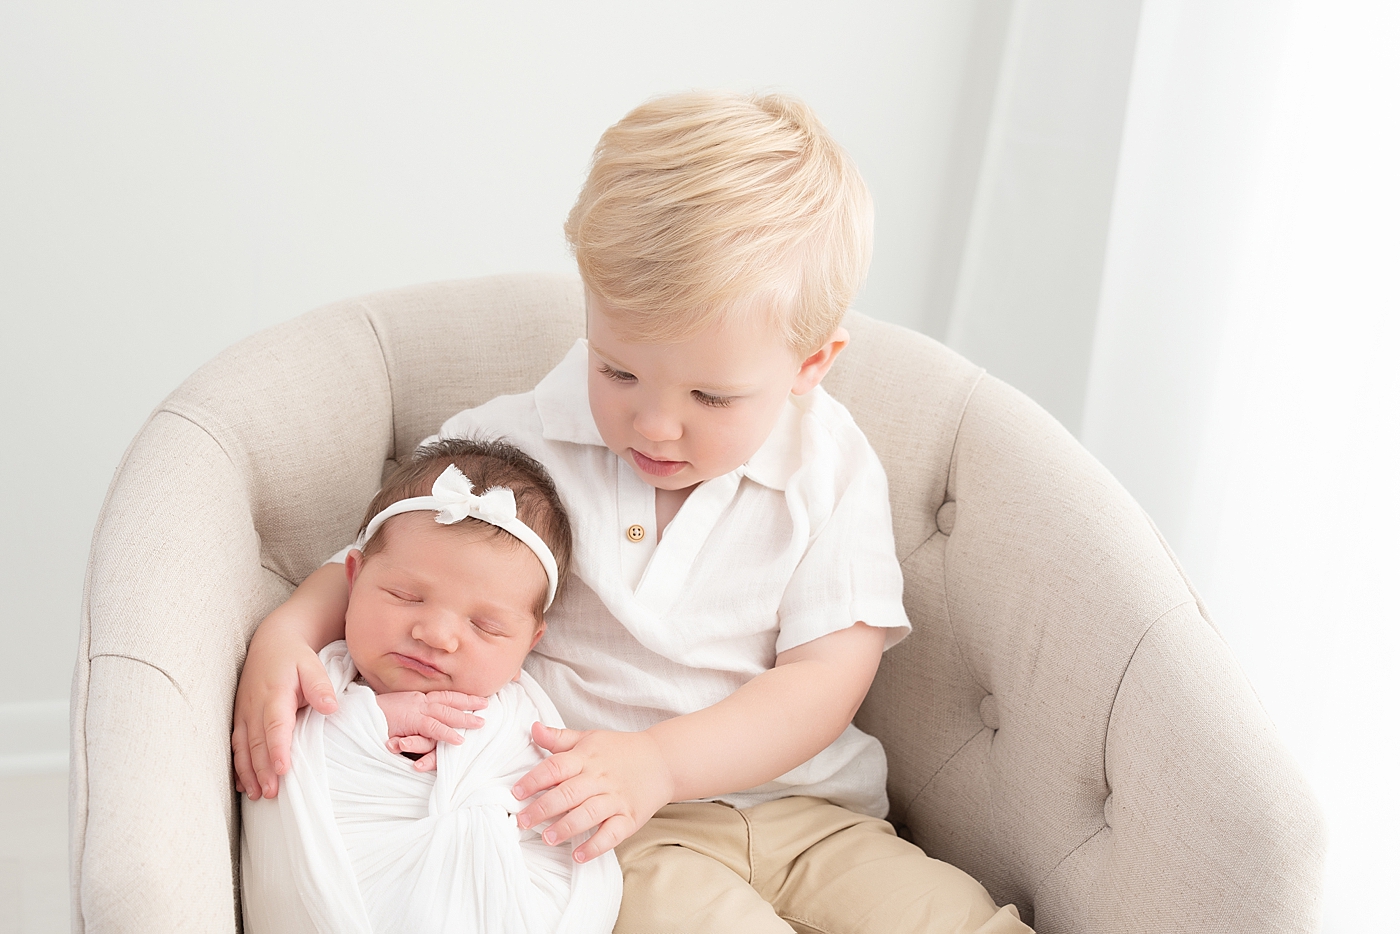 Brother and sister photo in studio during newborn session. Photo by Rachel Brookes Photography.